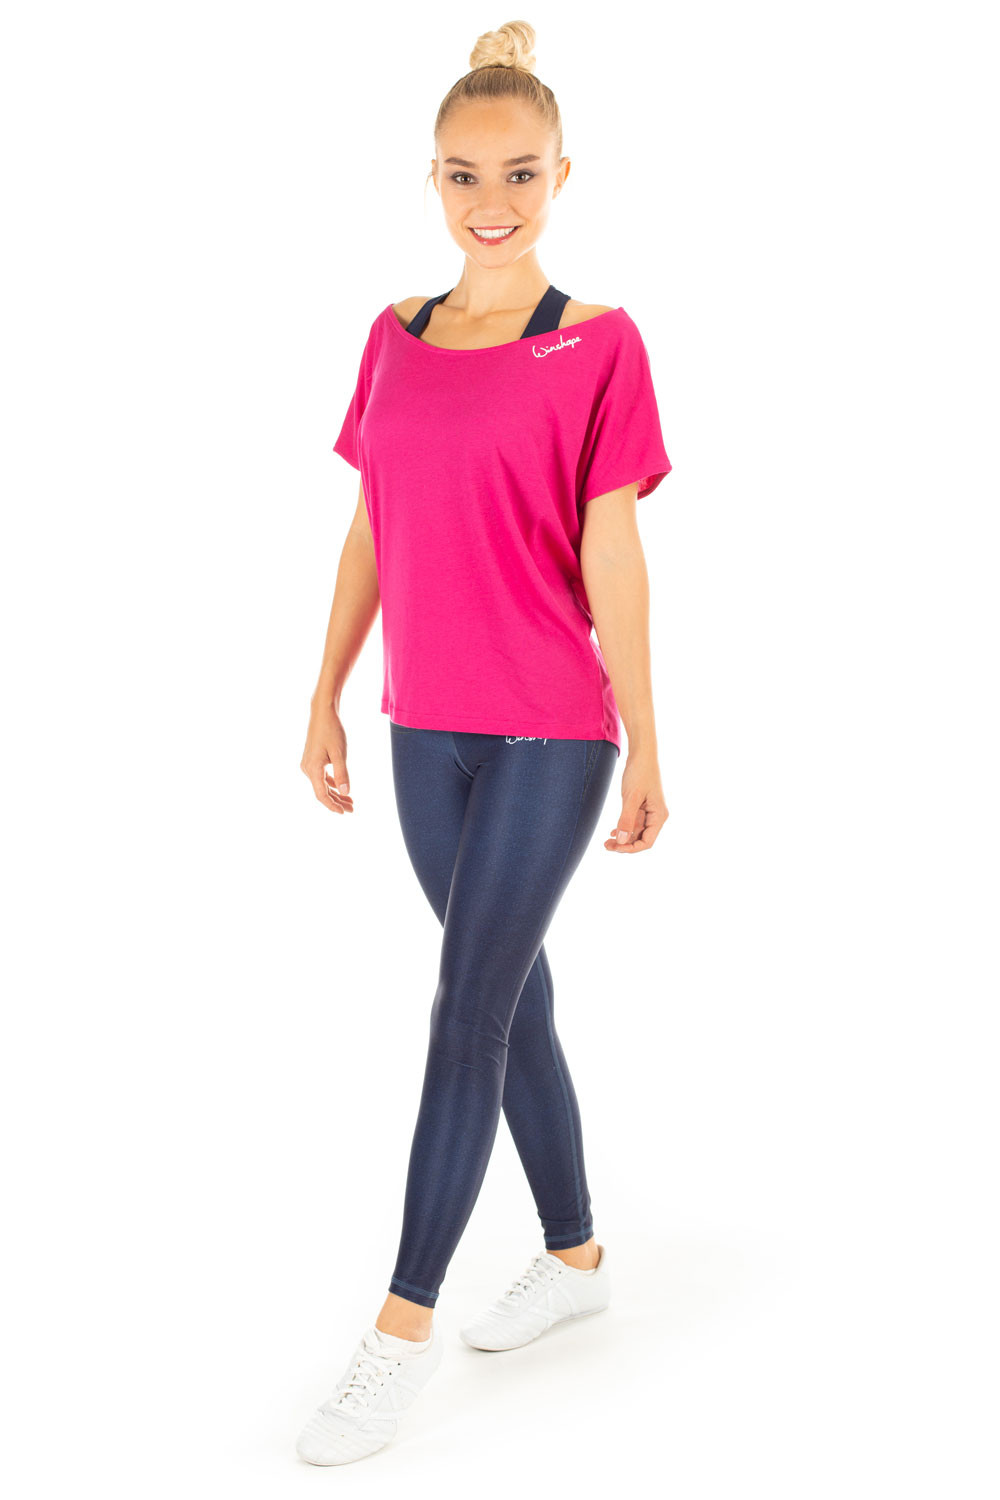 Functional Power Shape Jeans rich Winshape Slim blue, “Bootylicious”AEL102, Style Tights